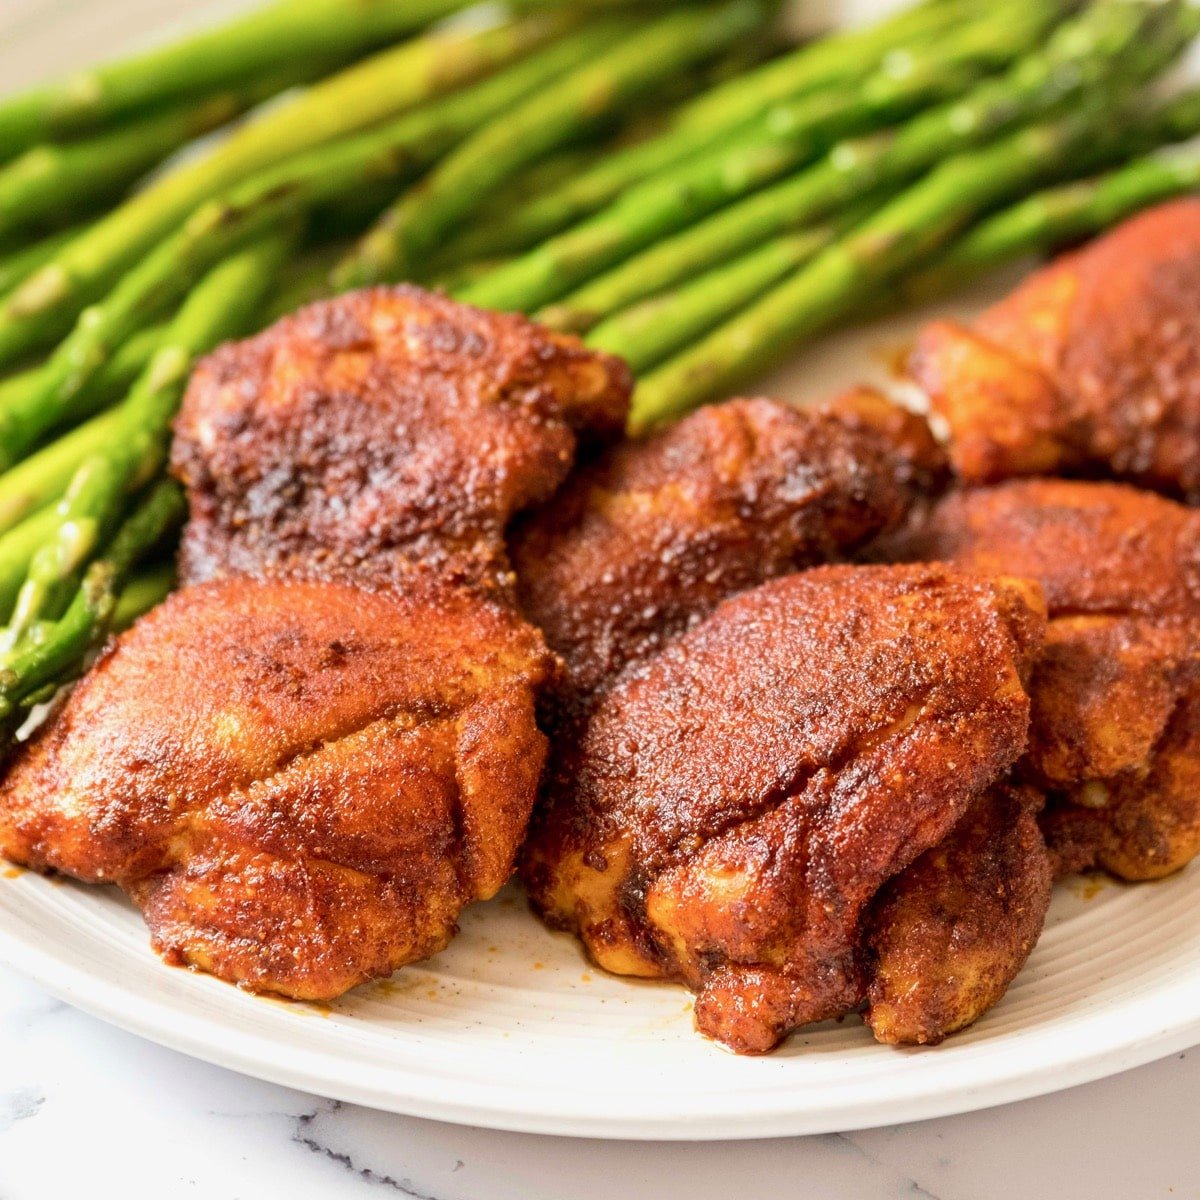 Square Crop - Smoked Paprika Chicken Thighs with boneless skinless thighs, roasted asparagus in background, on a white plate on a white marble countertop.